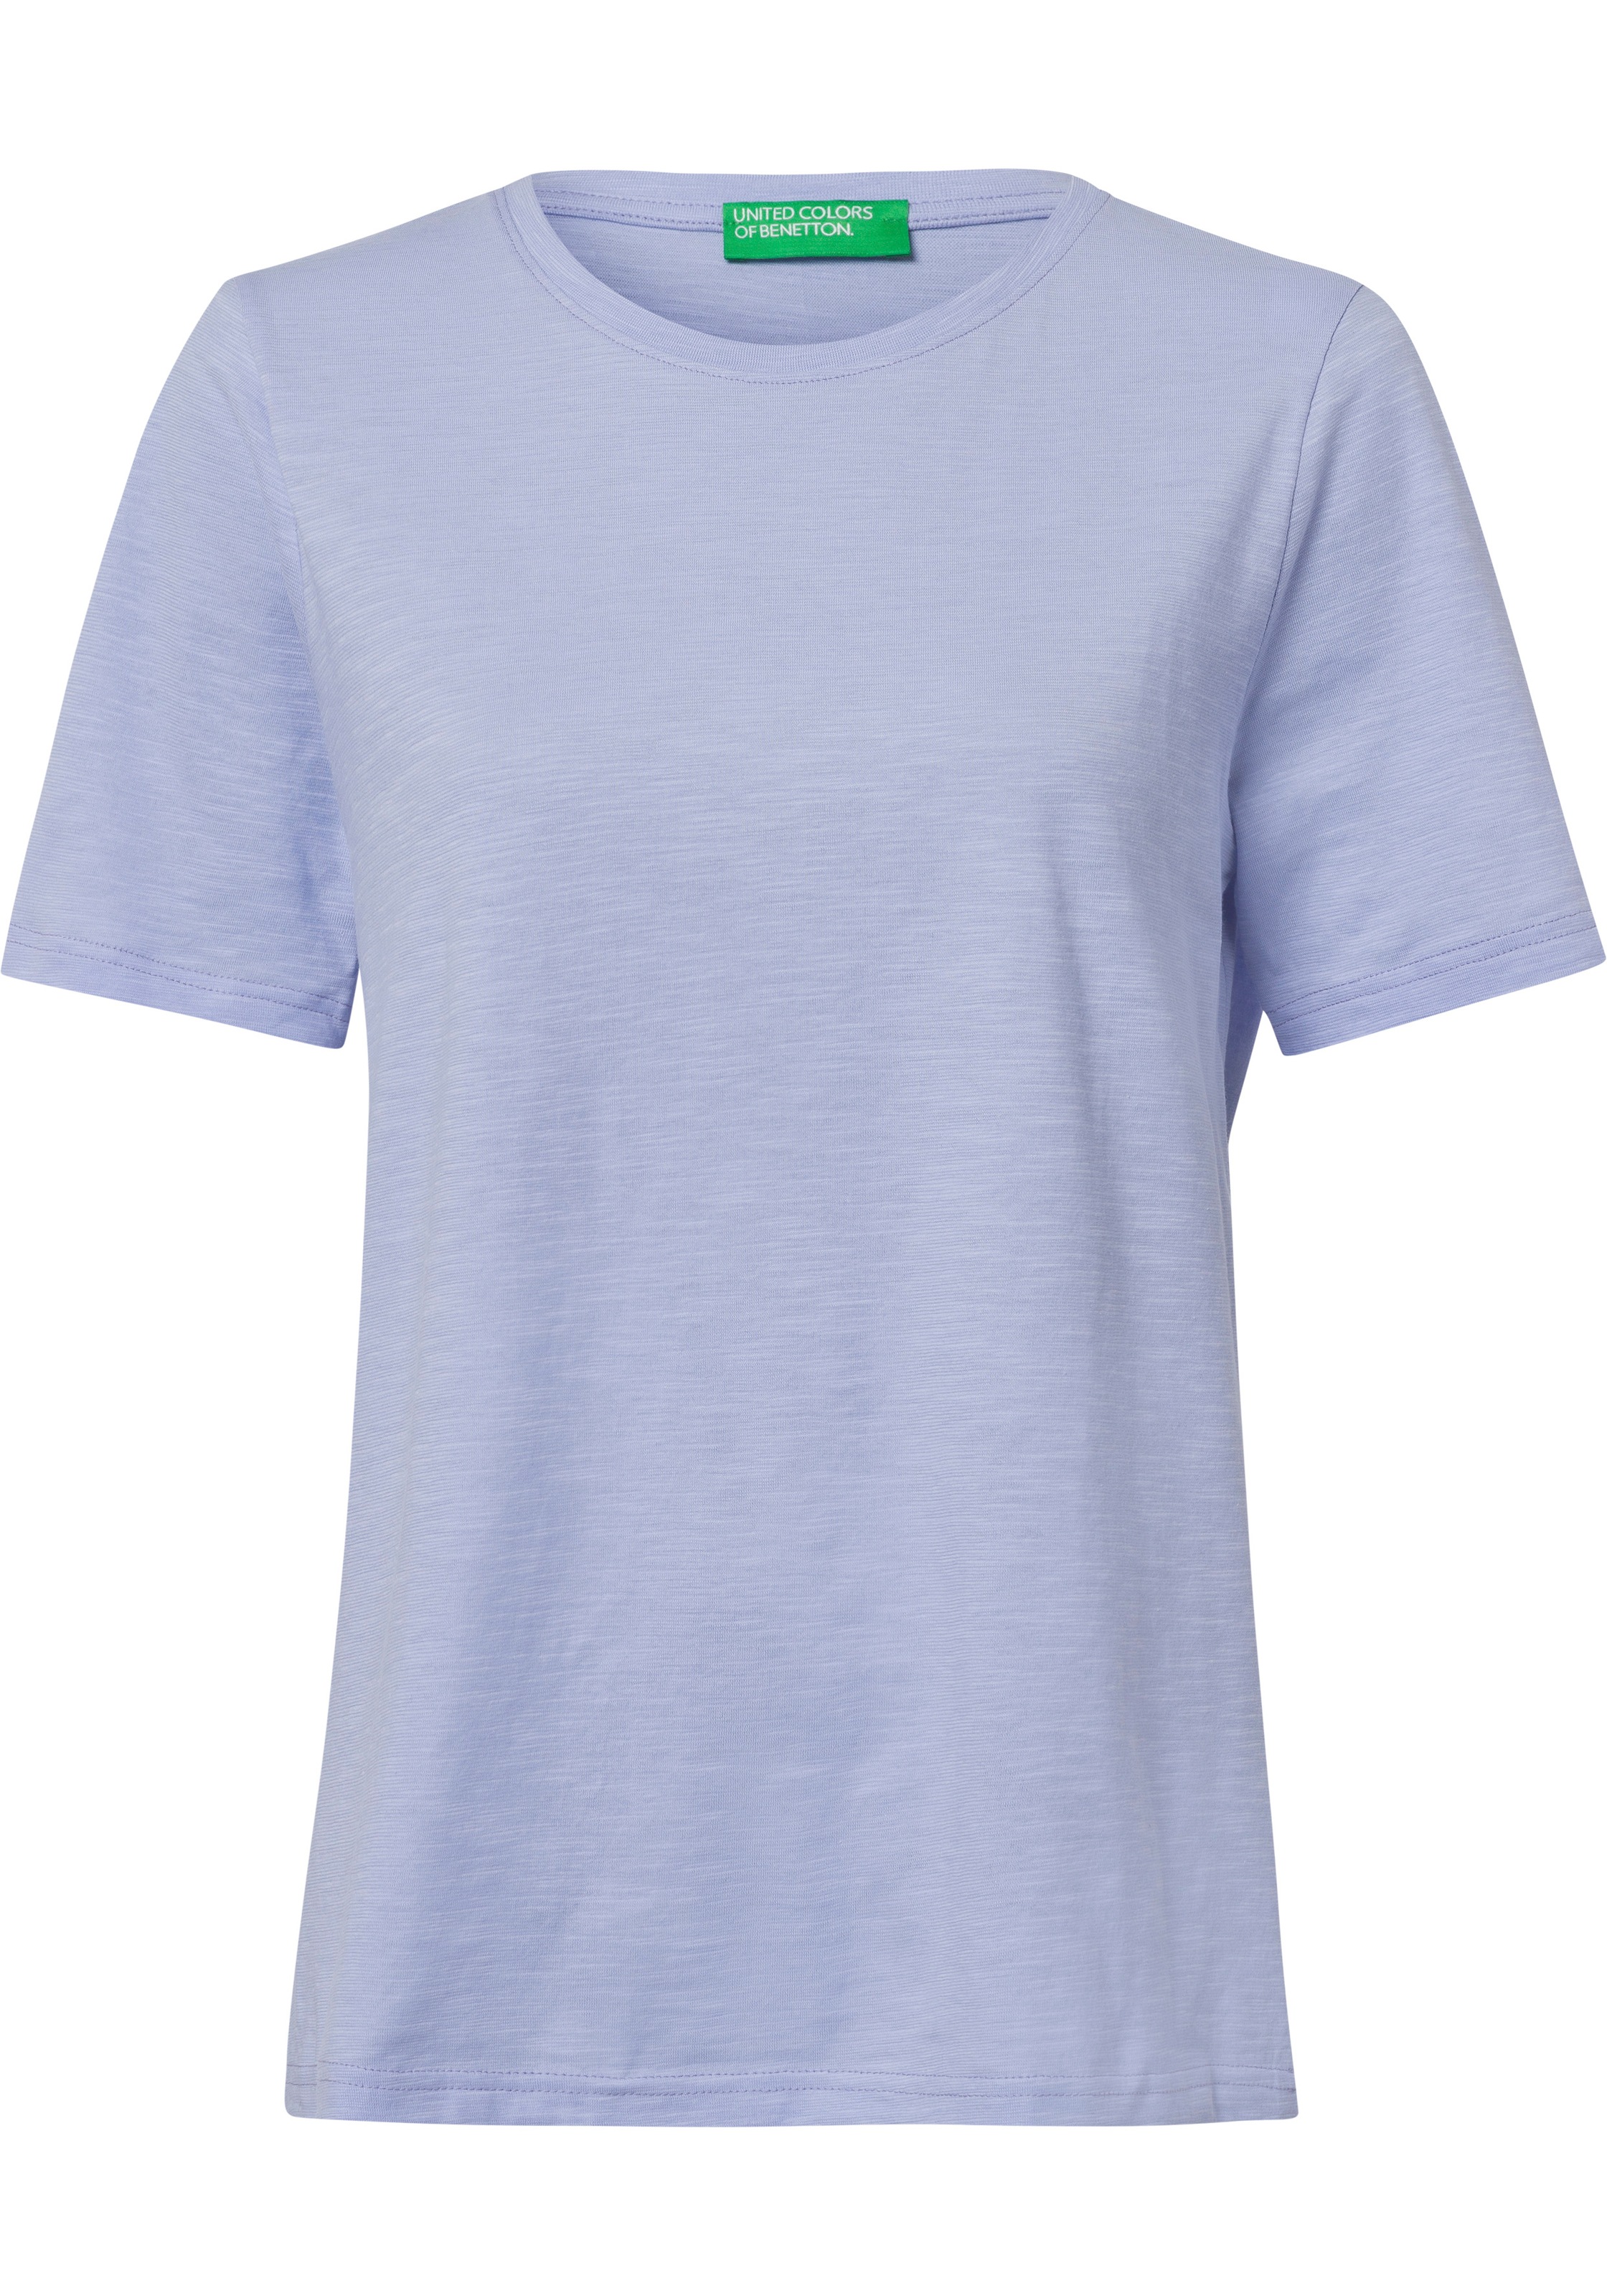 United Colors of Benetton T-Shirt, bei in ♕ Basic-Optik cleaner